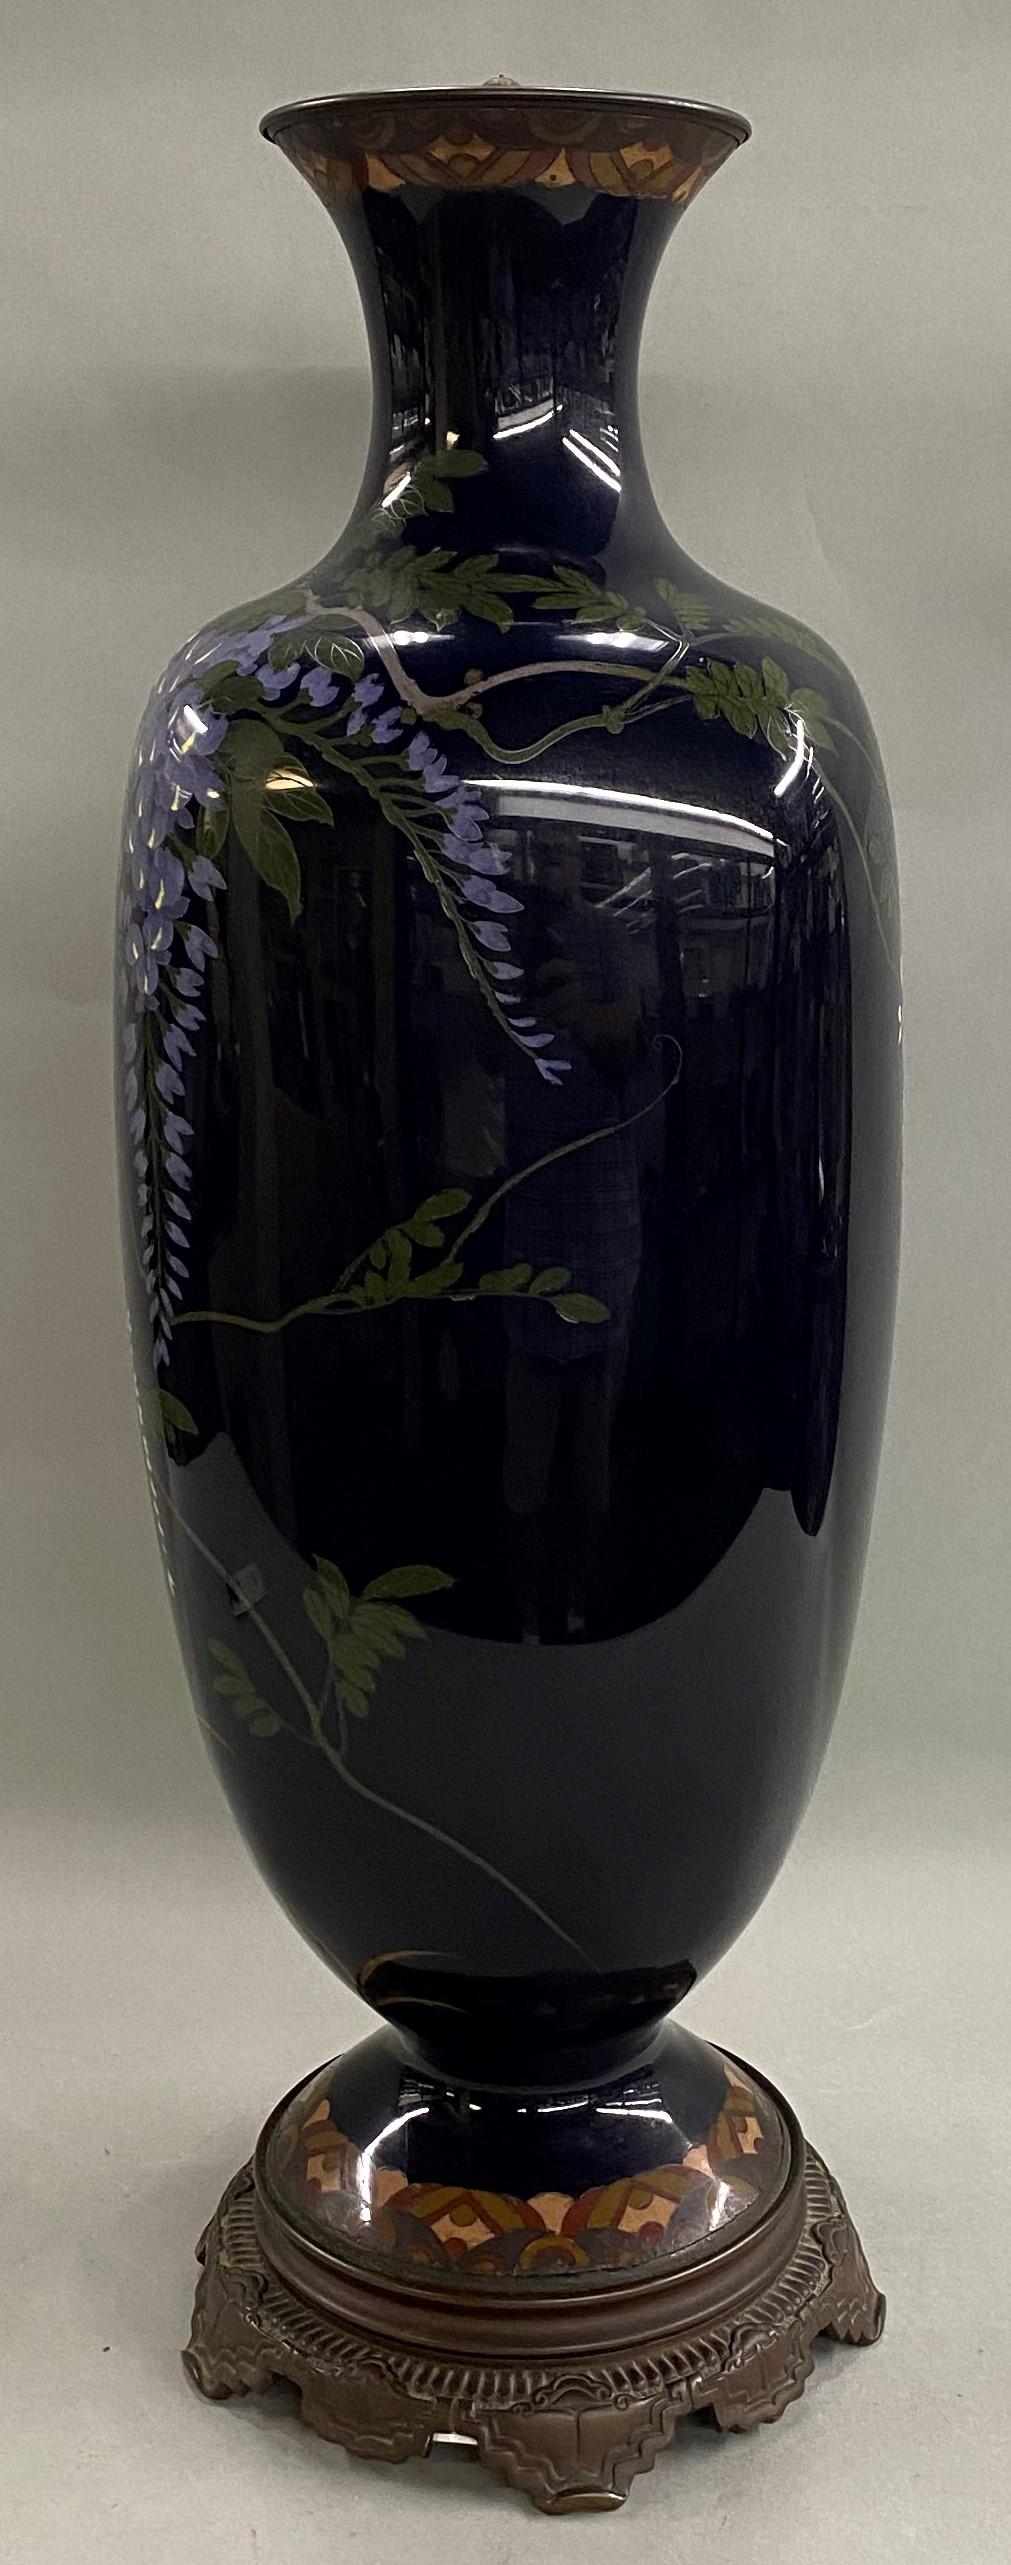 A fine large Japanese cloisonne square form vase with flared lip and round base, decorated with a large bird, wisteria, and other flowers on a deep blue background, with geometric earth tone accents around the rim and decorative brass base. The